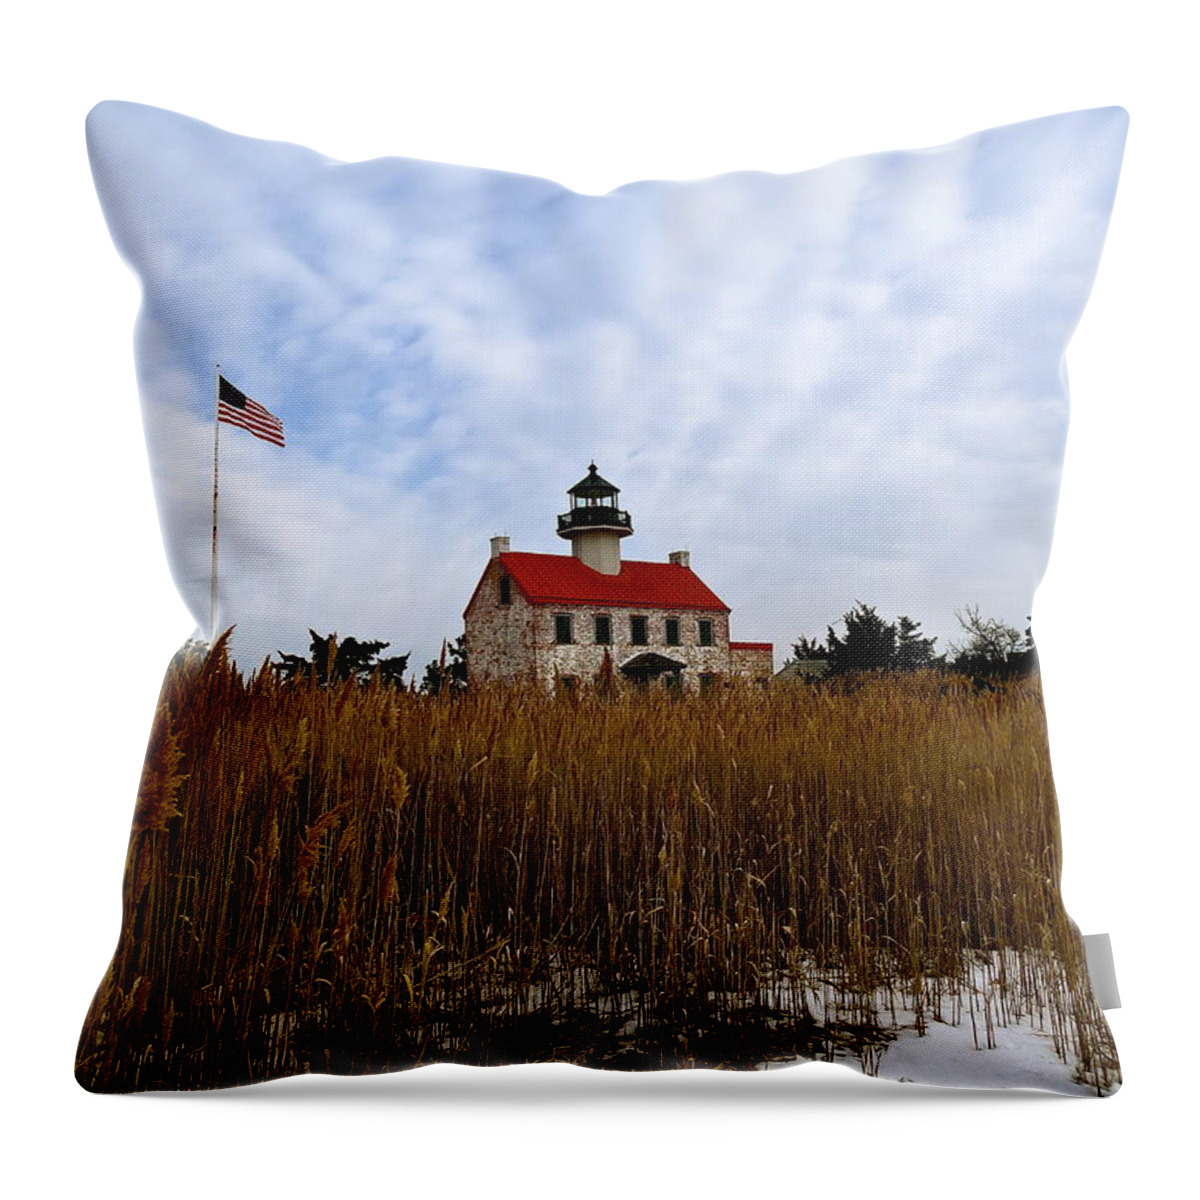 East Point Lighthouse Throw Pillow featuring the photograph Cold Day At East Point by Nancy Patterson